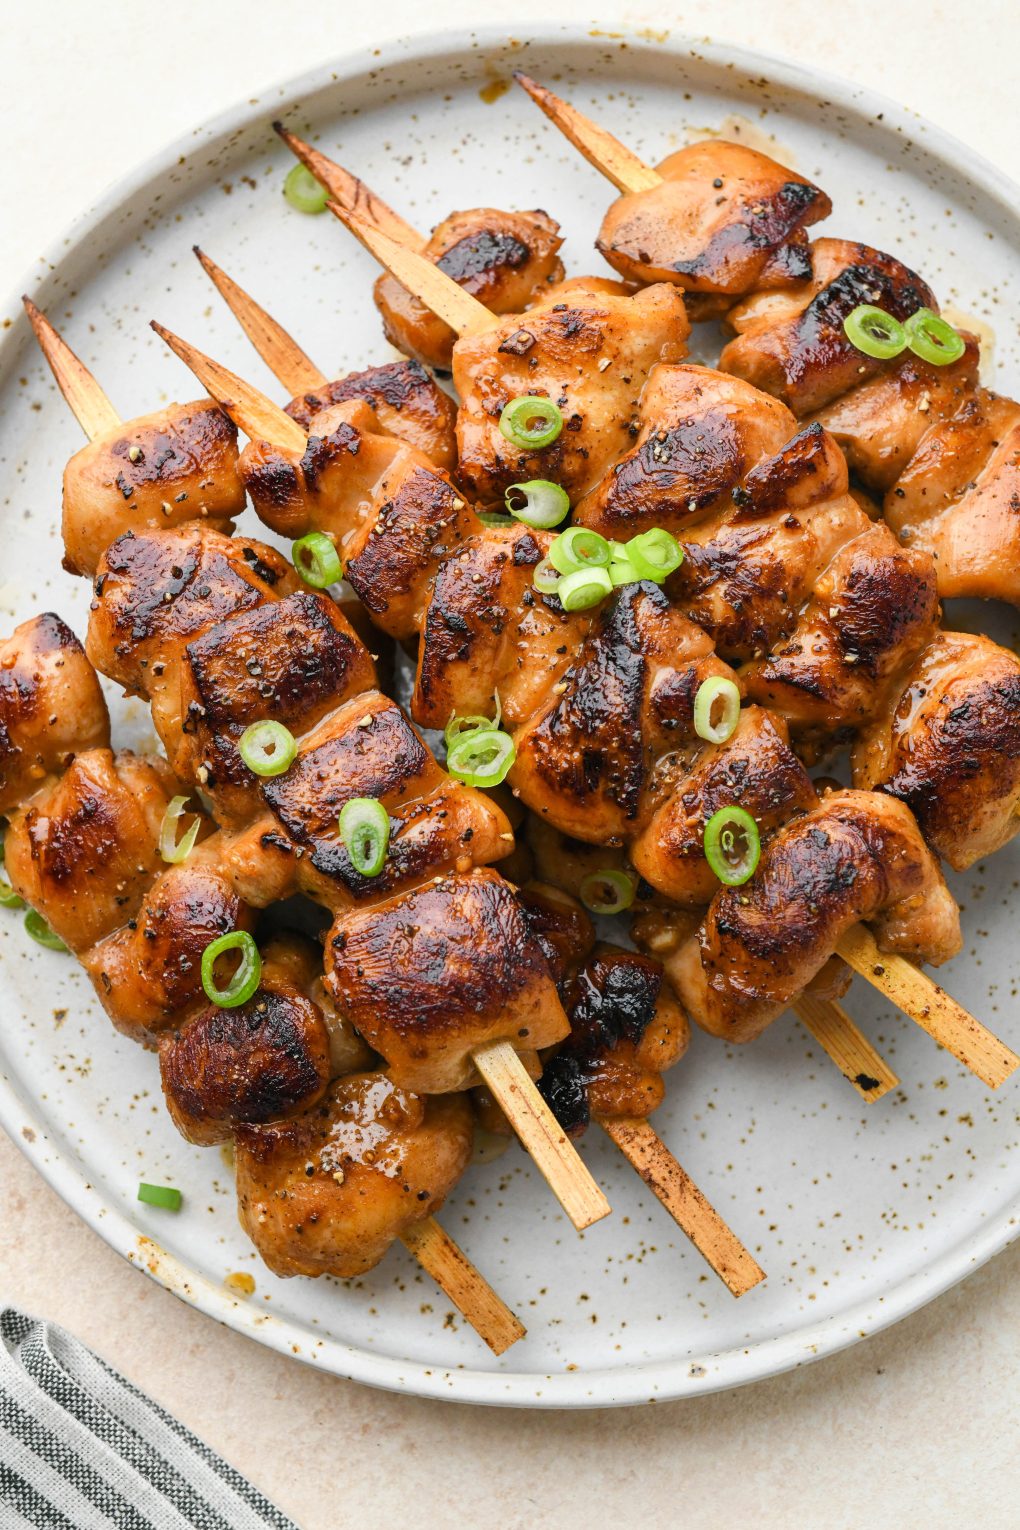 Cooked garlic ginger chicken skewers piled on a plate and topped with thinly sliced green onions.